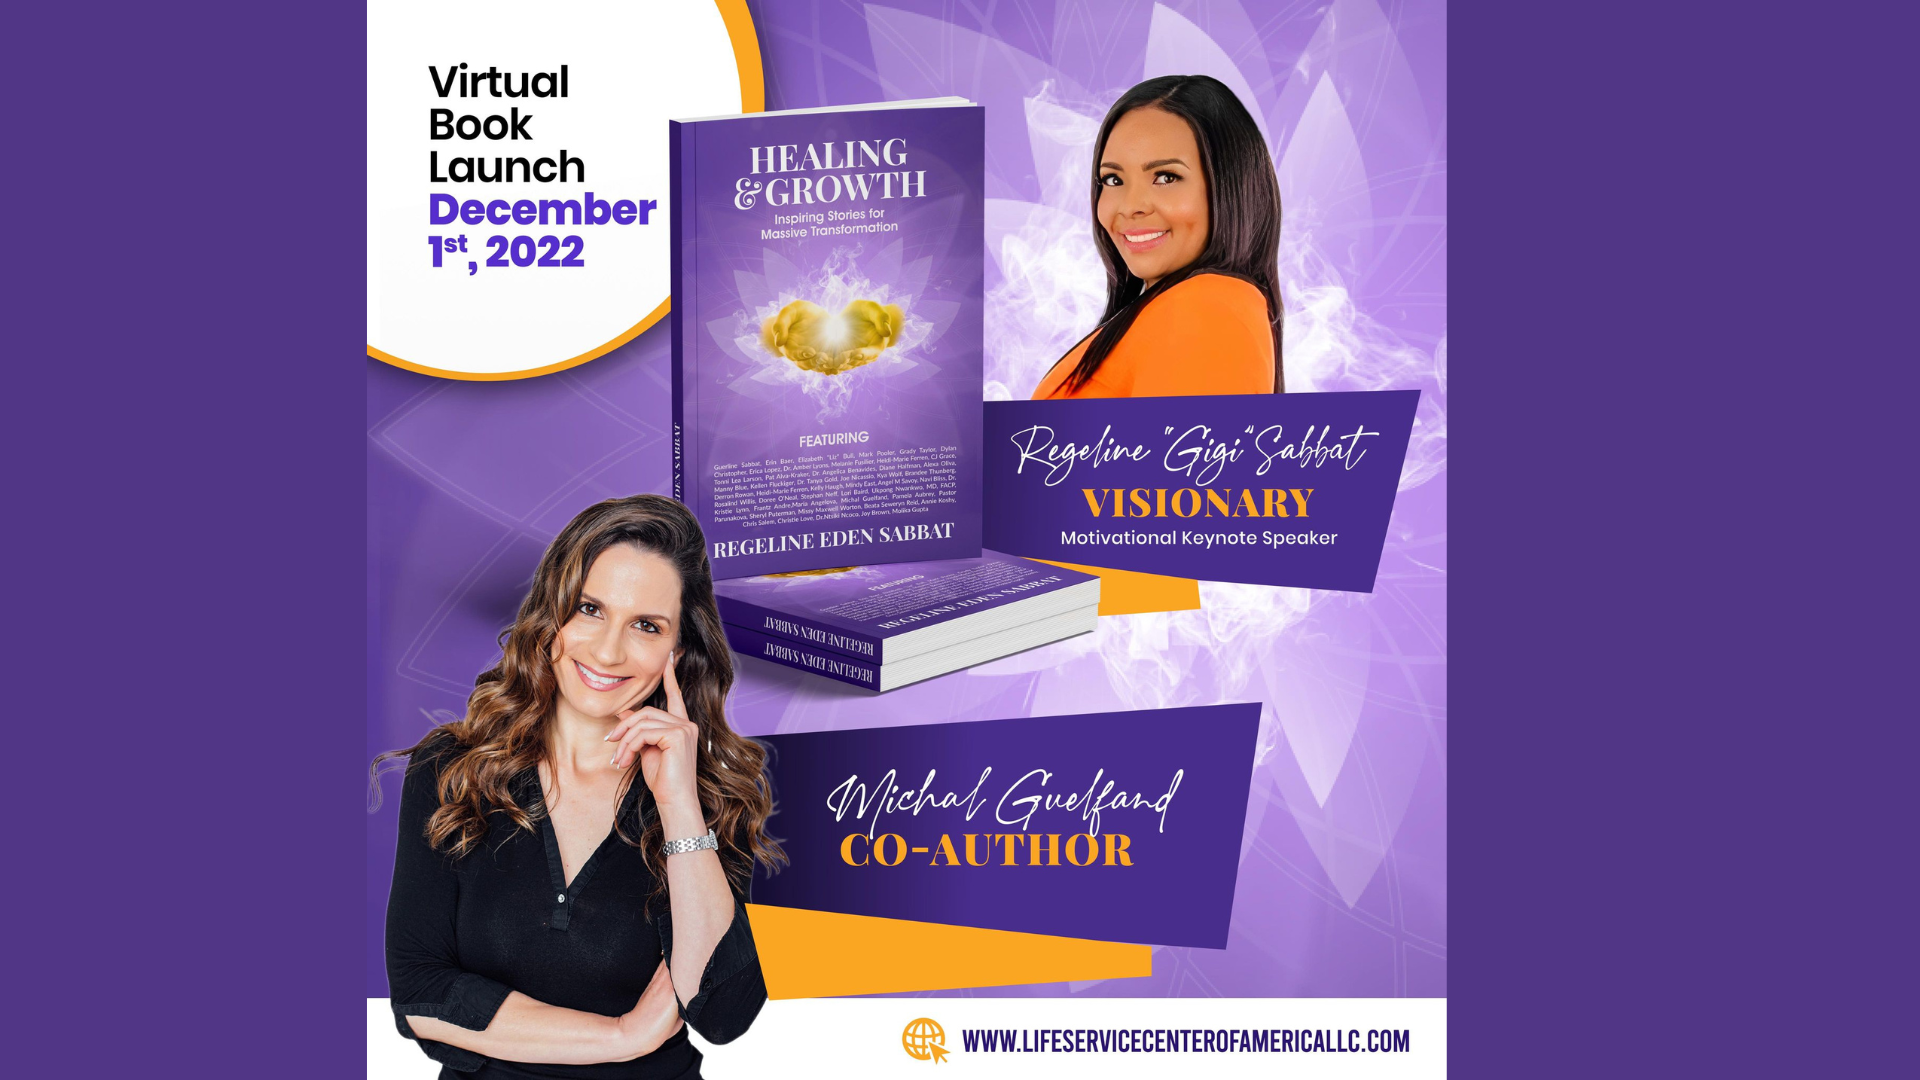 Michal Guelfand Co-Author Healing & Growth Book